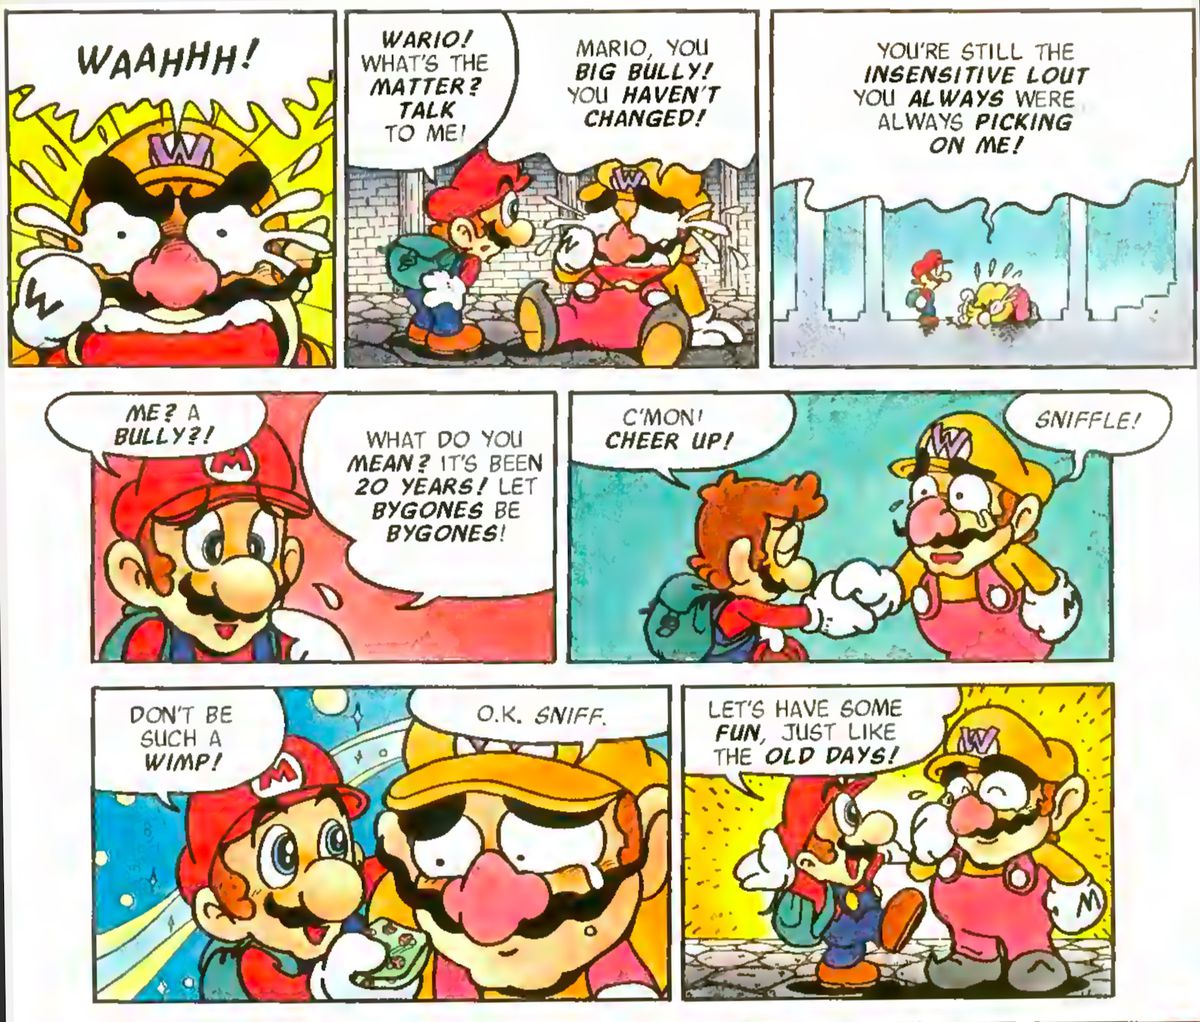 Wario cries, and Mario and Wario reconnect in a page from Mario vs. Wario #1